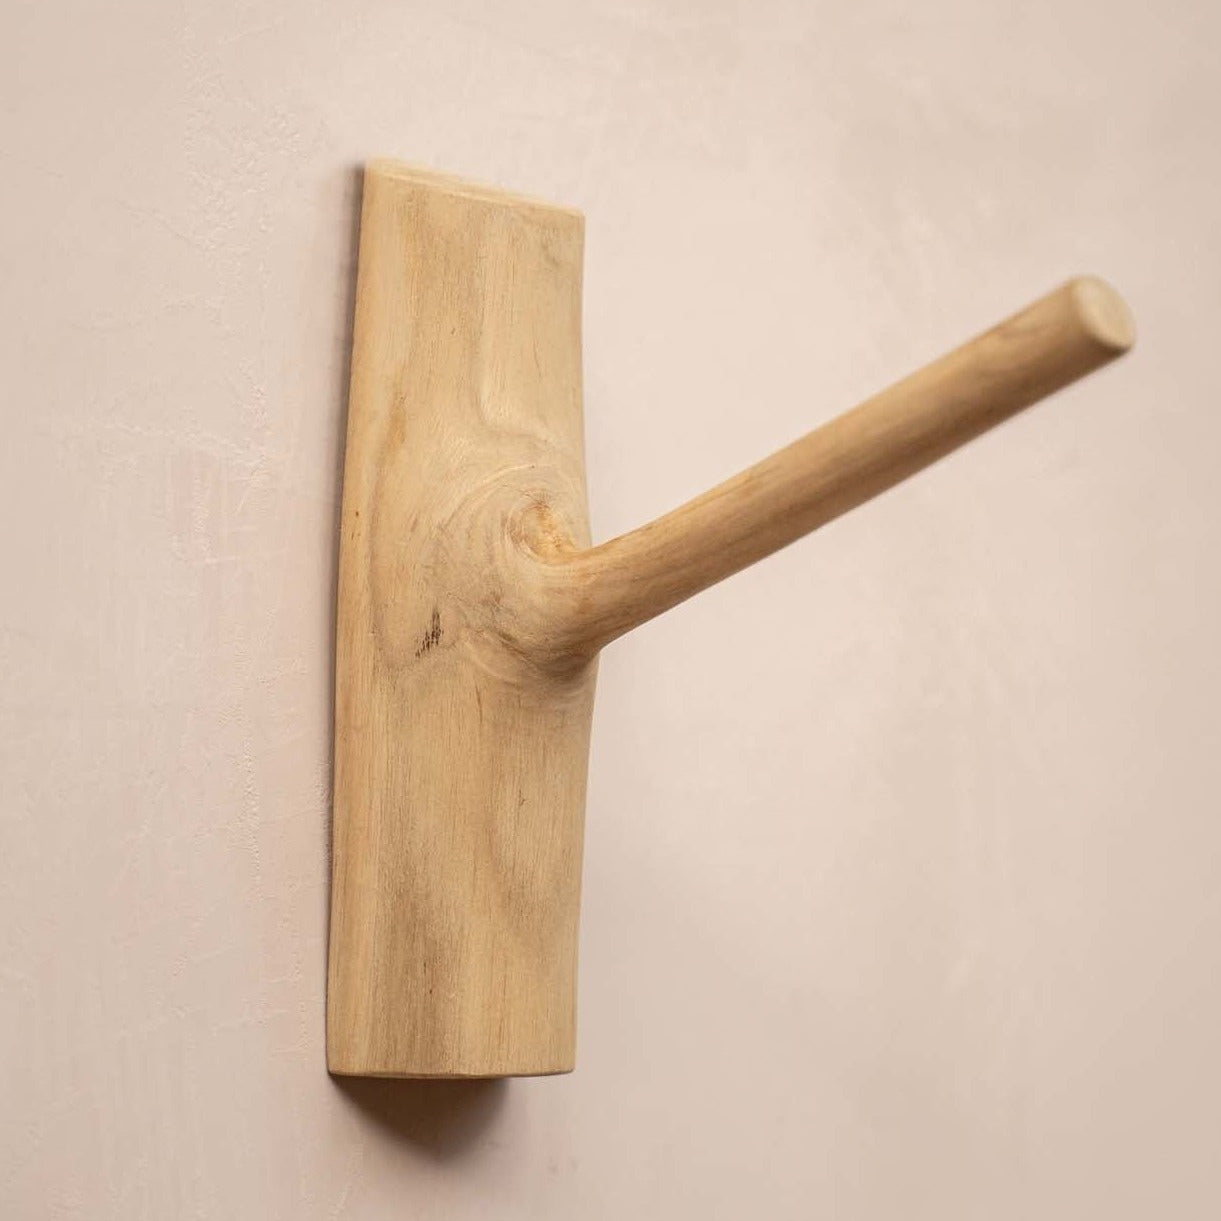 Functional Strong Heavy-duty Rust-proof wooden wall cabinet hooks 